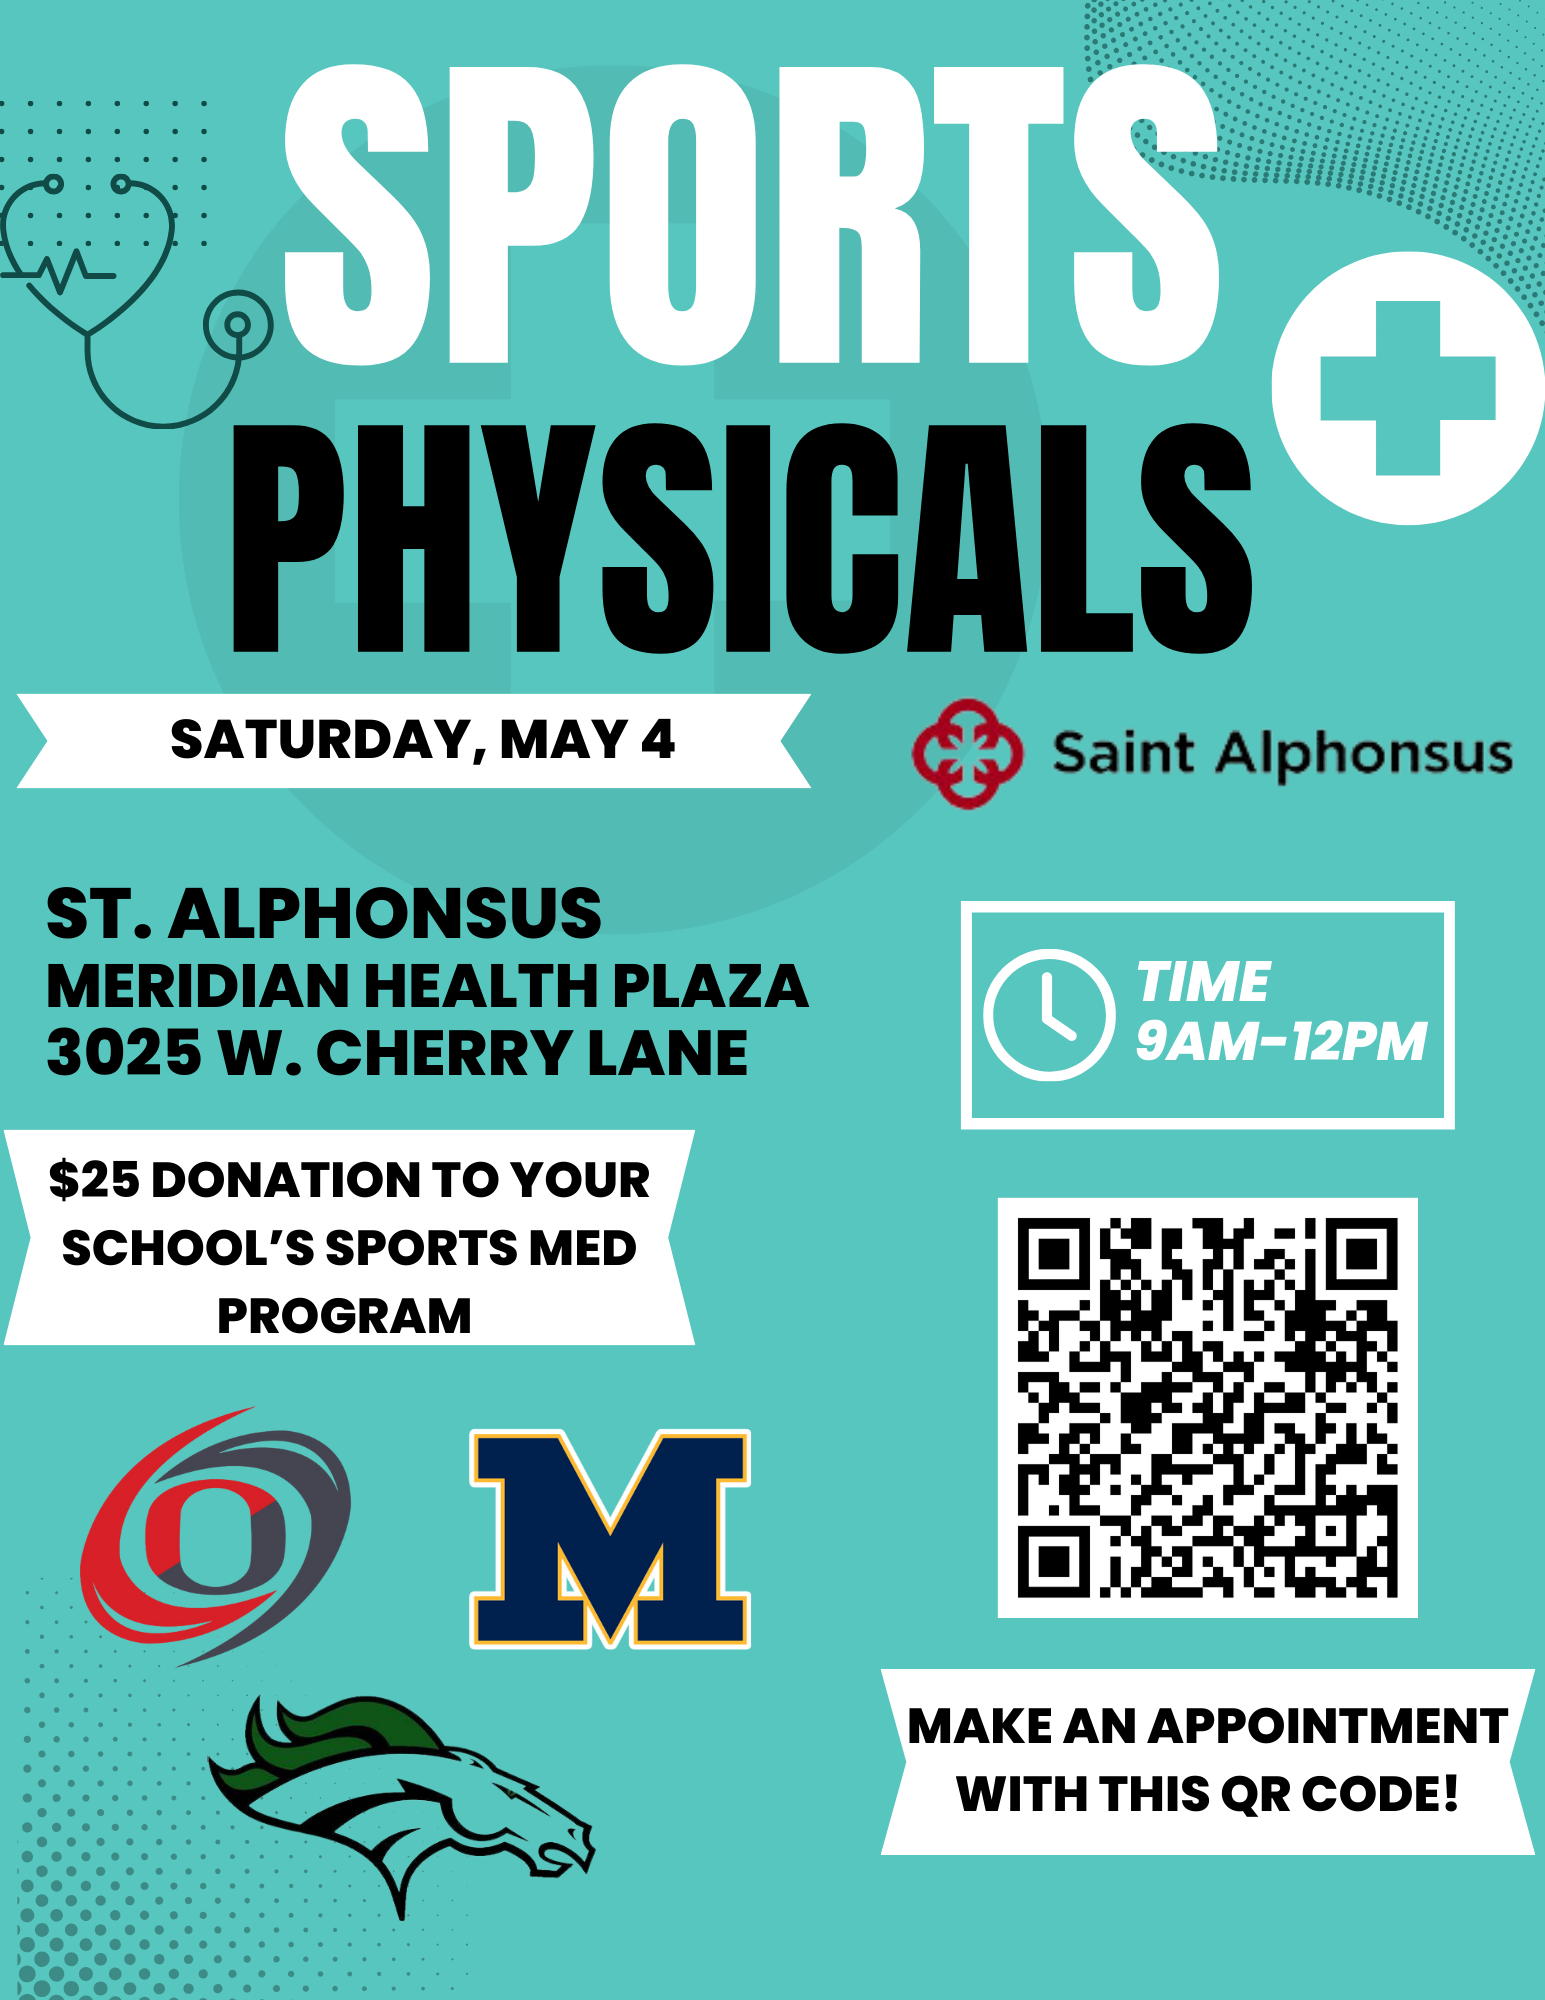 Sports Physical Clinic Flyer